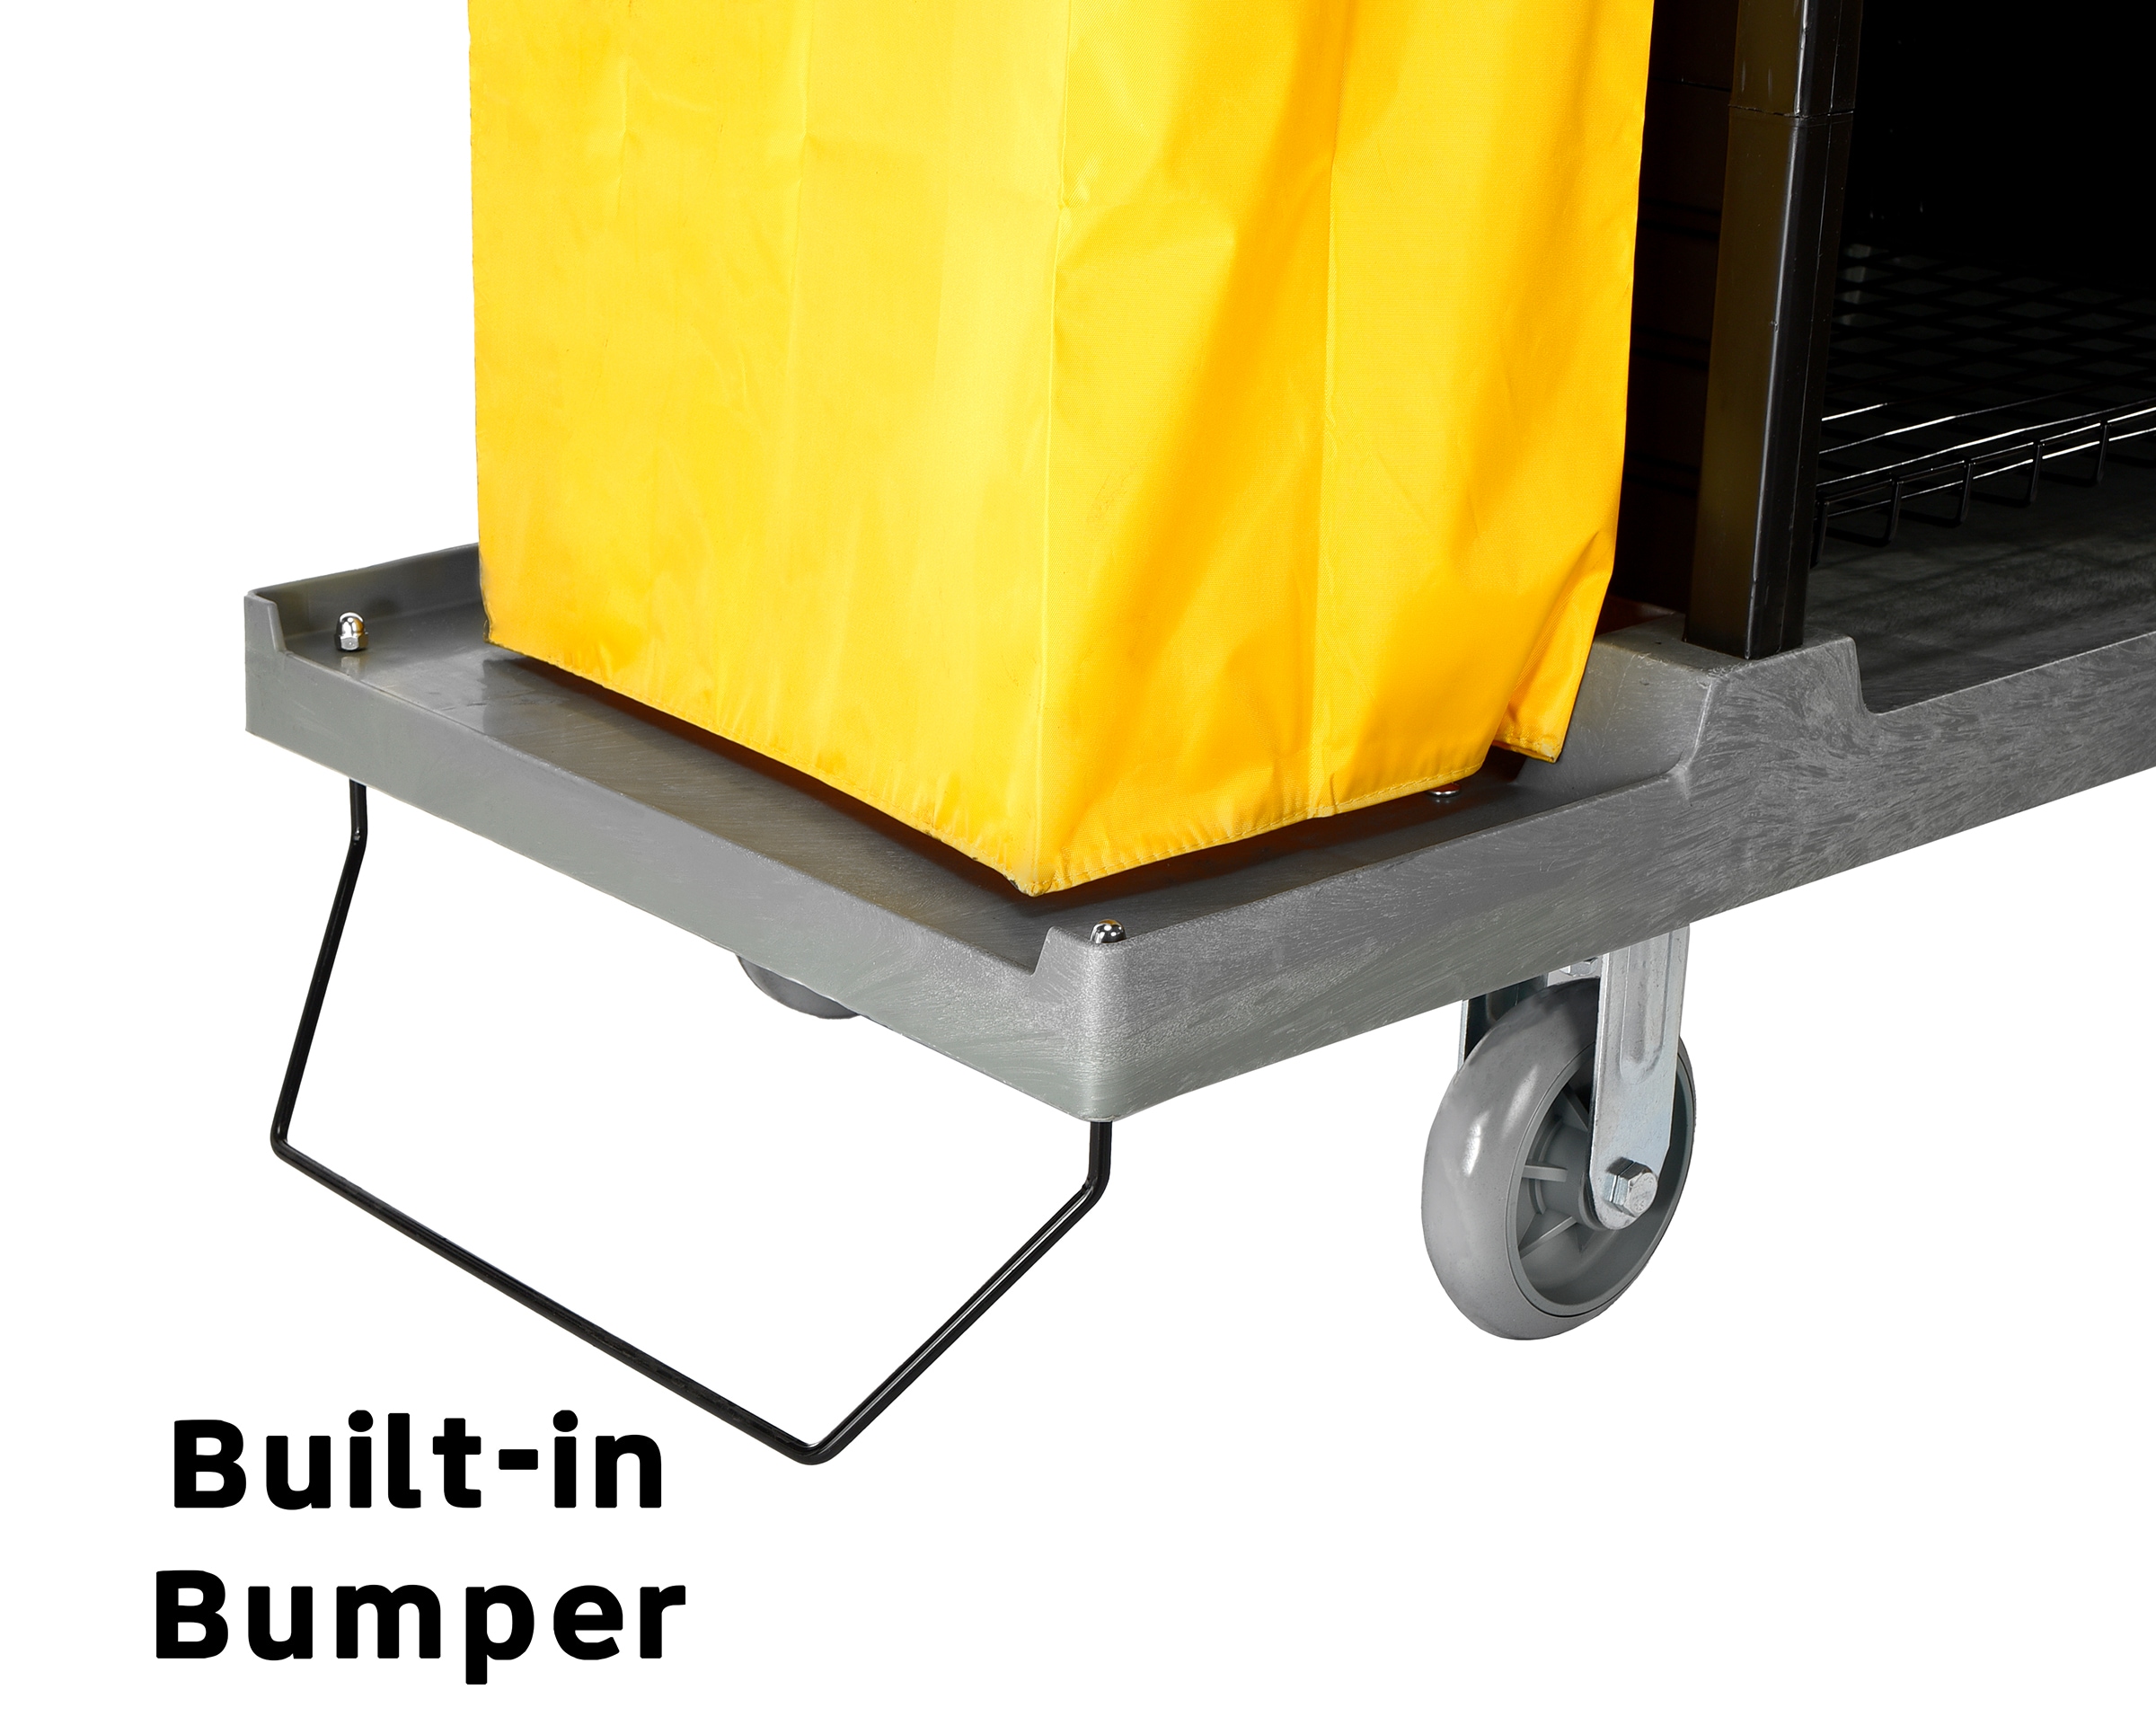 Alpine Industries Janitorial Cleaning Cart, 36-Quart Mop Bucket and Caution  Wet Floor Sign Kit in the Janitorial Carts department at